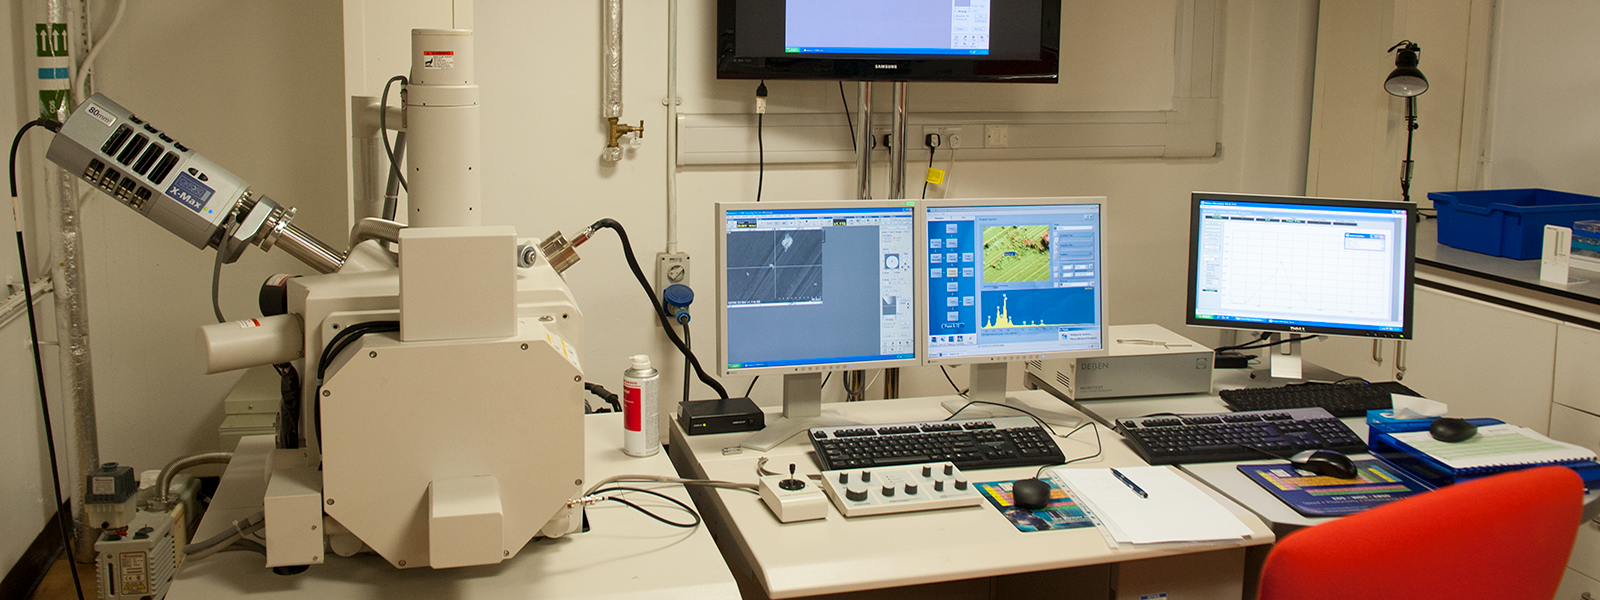 A photo of one of our microscopes in the AMRL